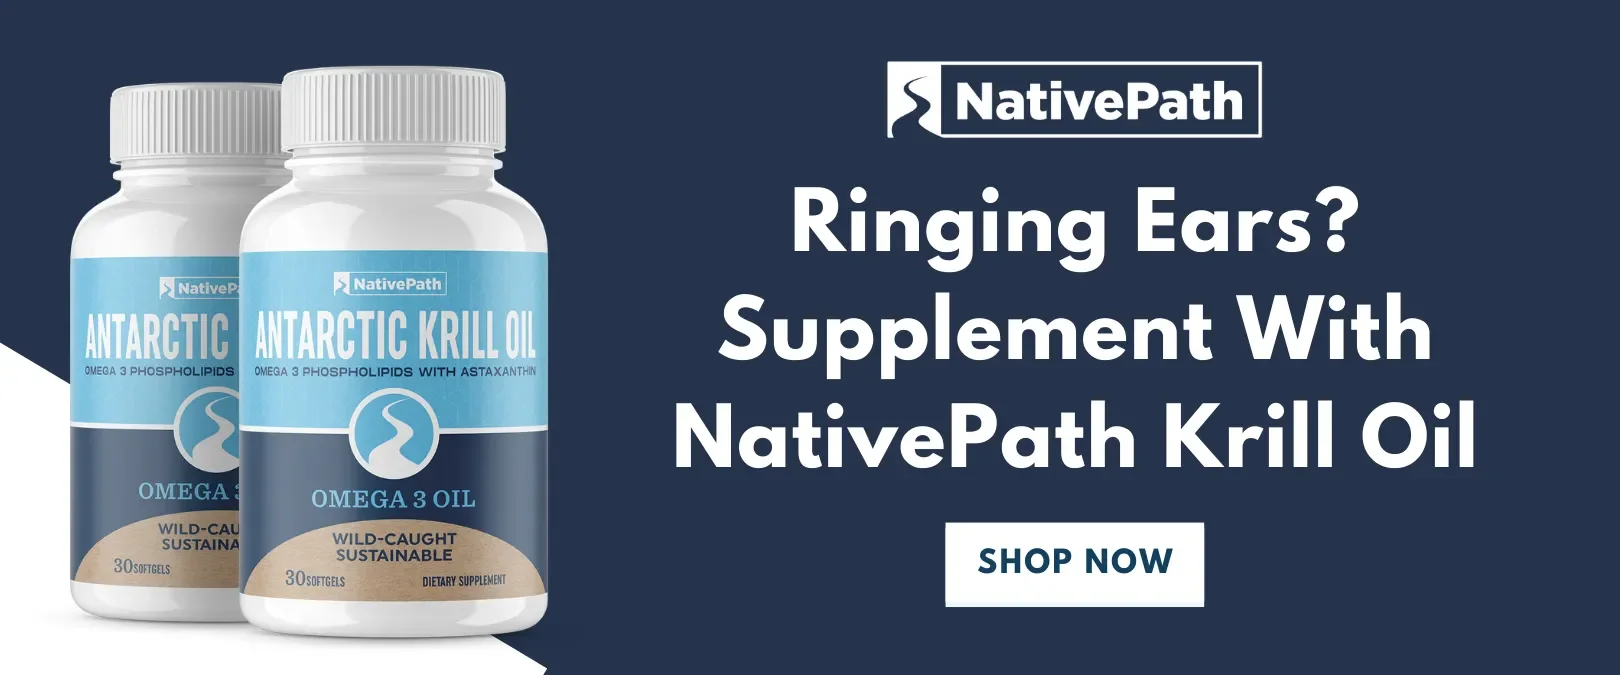 Ringing Ears? Supplement With NativePath Krill Oil